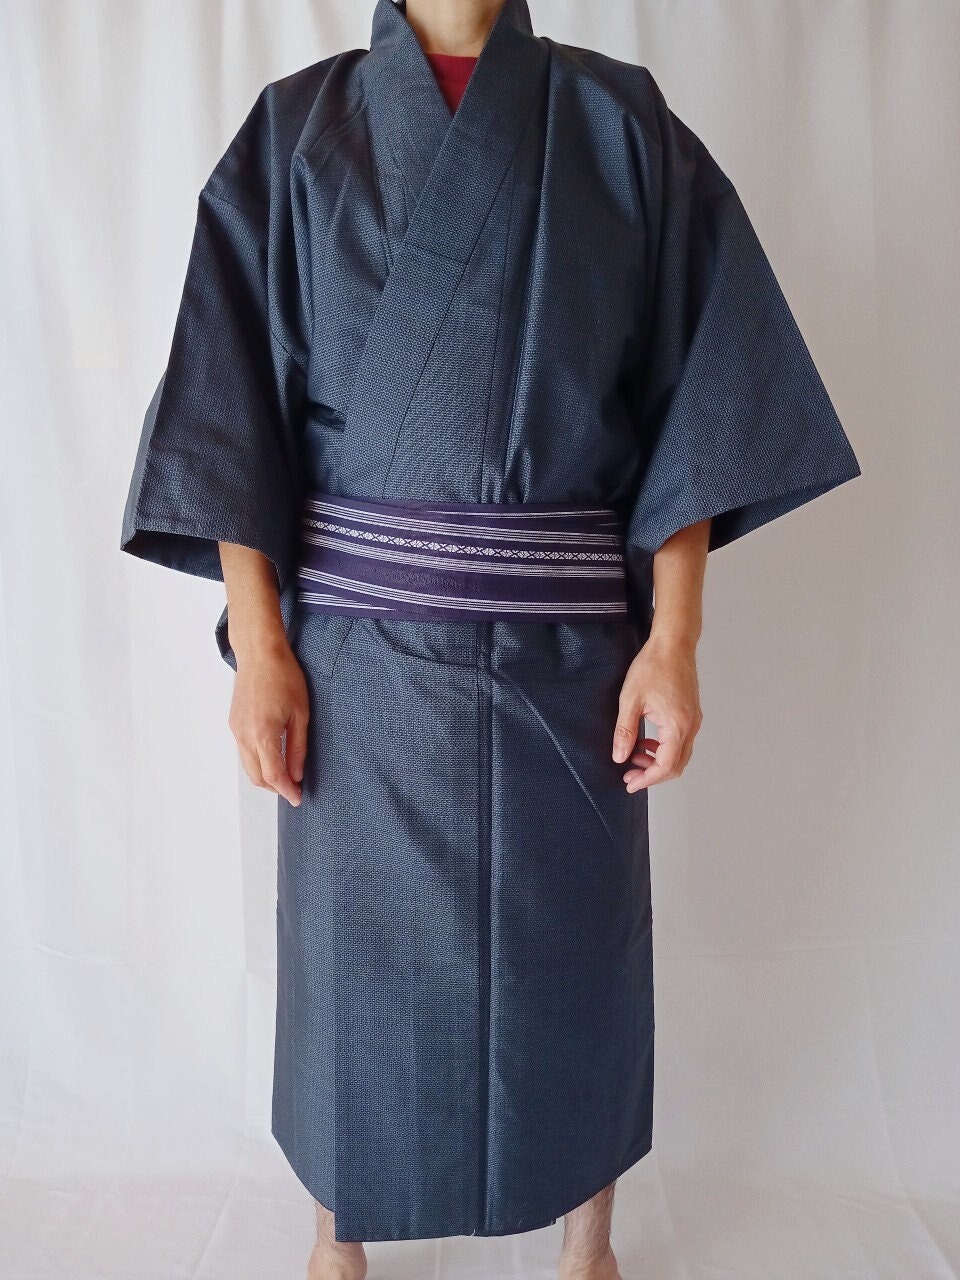 Vintage Japanese Kimono Kimono Dress For Men Traditional Samurai Asian Style  With Floweral Accents Perfect For Evening Events And Formal Occasions From  Zzblzl, $48.7 | DHgate.Com